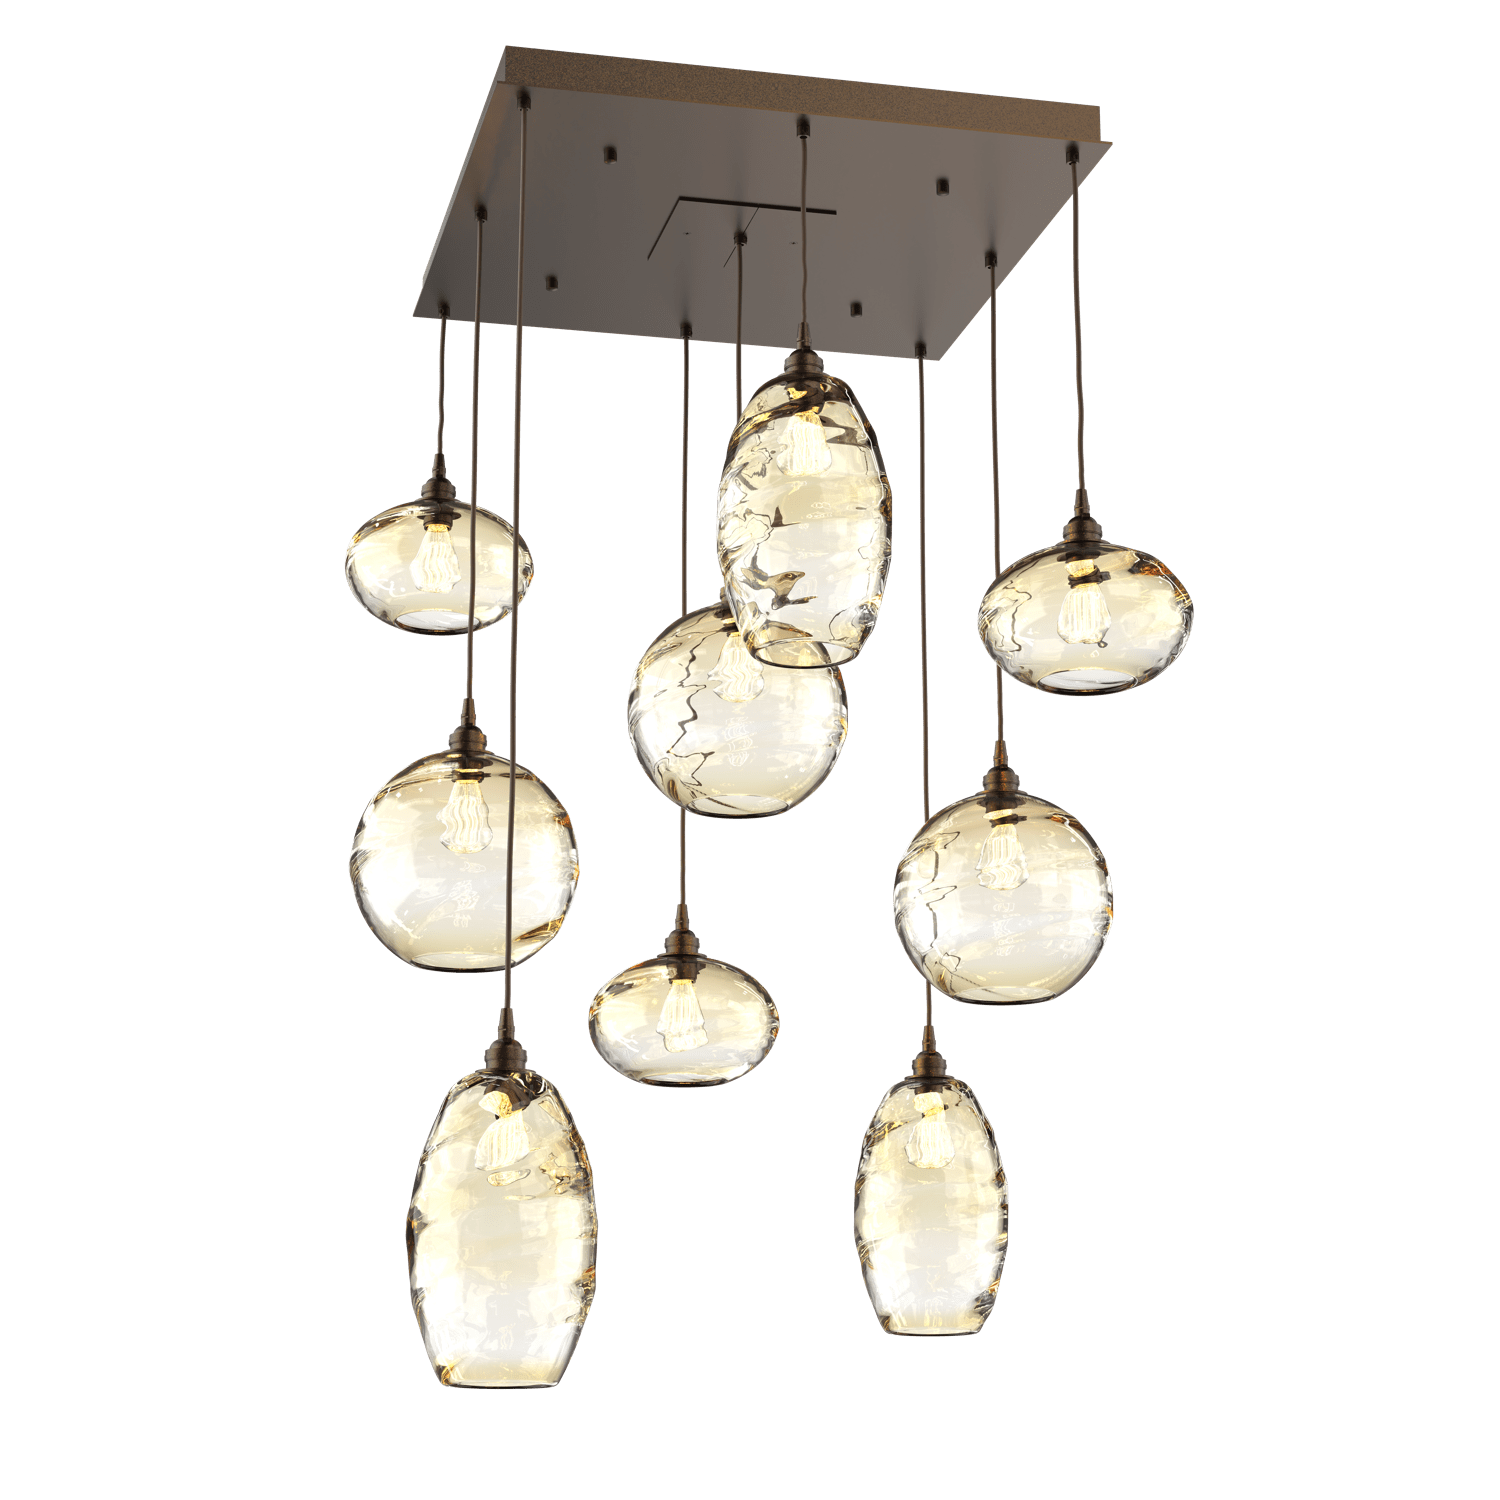 CHB0048-09-FB-OA-Hammerton-Studio-Optic-Blown-Glass-Misto-9-light-square-pendant-chandelier-with-flat-bronze-finish-and-optic-amber-blown-glass-shades-and-incandescent-lamping